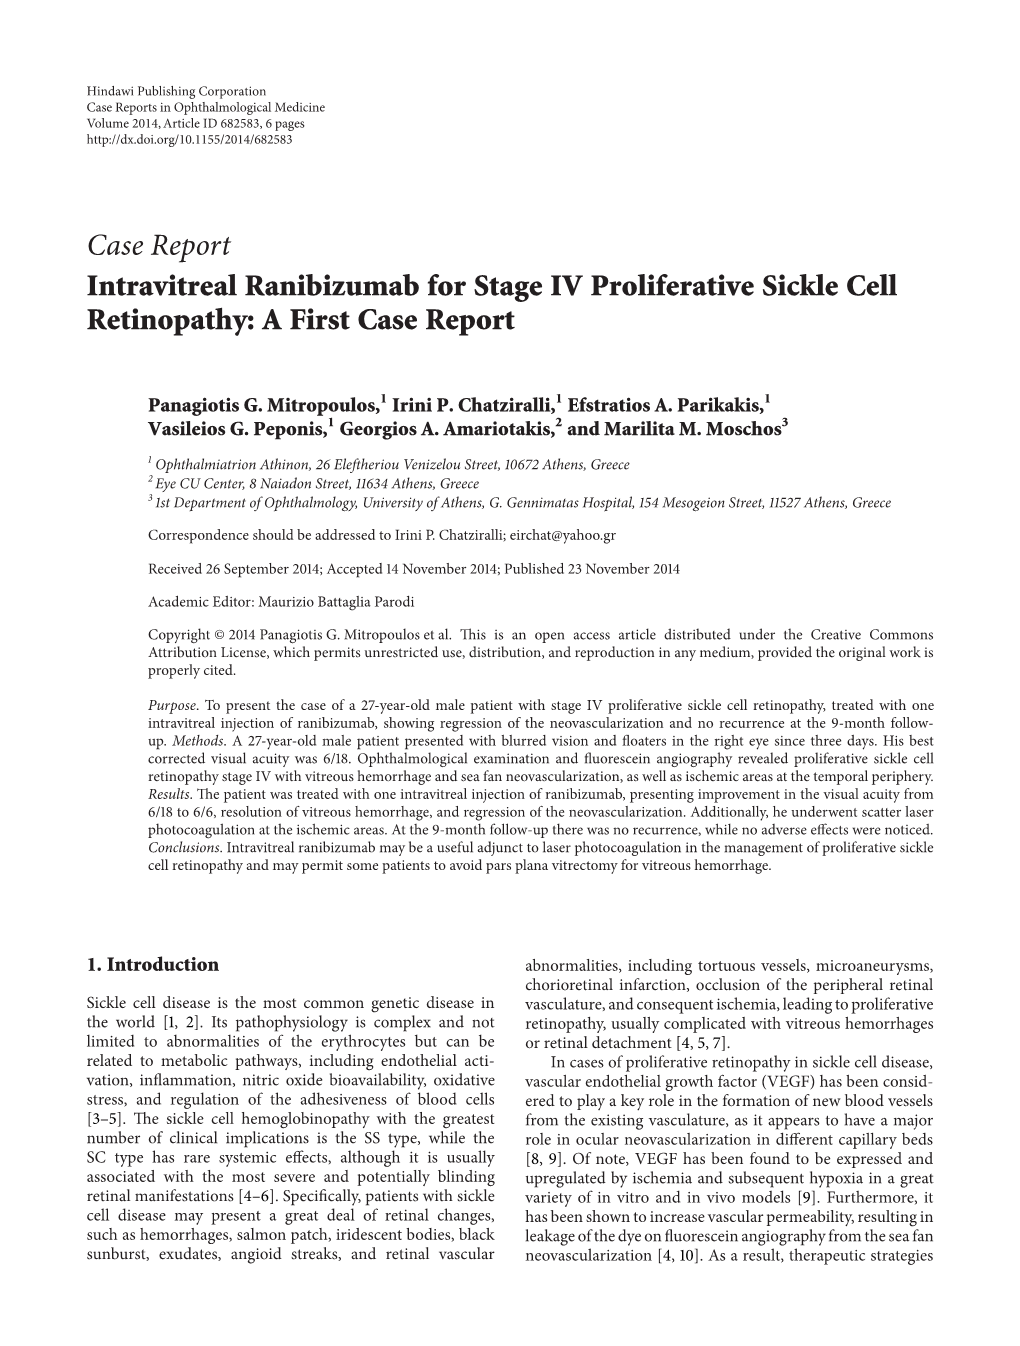 Case Report Intravitreal Ranibizumab for Stage IV Proliferative Sickle Cell Retinopathy: a First Case Report